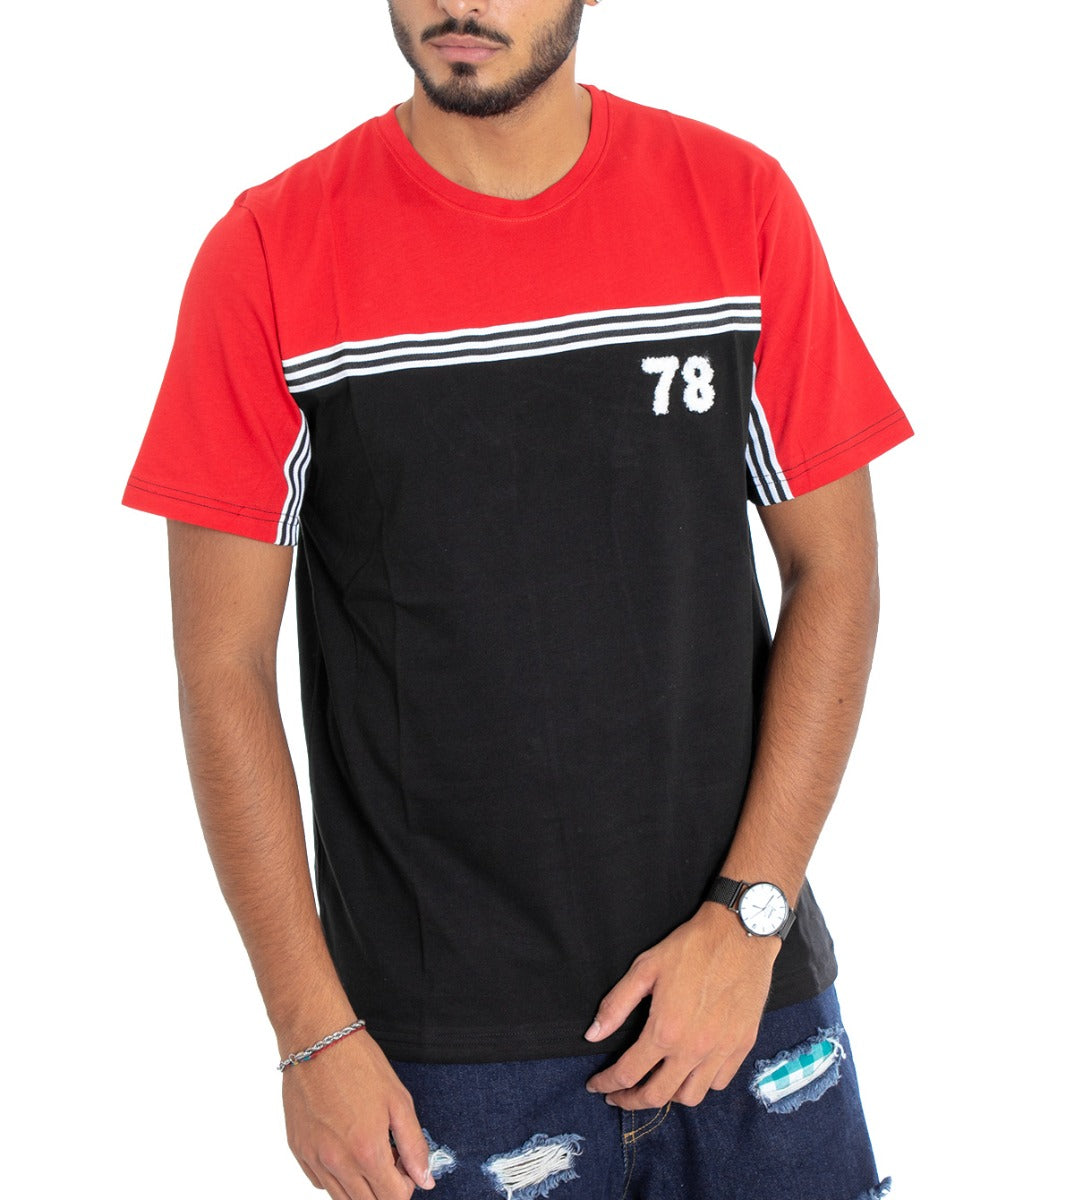 MOD Men's T-Shirt Round Neck Two-Tone Red Black Stripes Casual Print GIOSAL